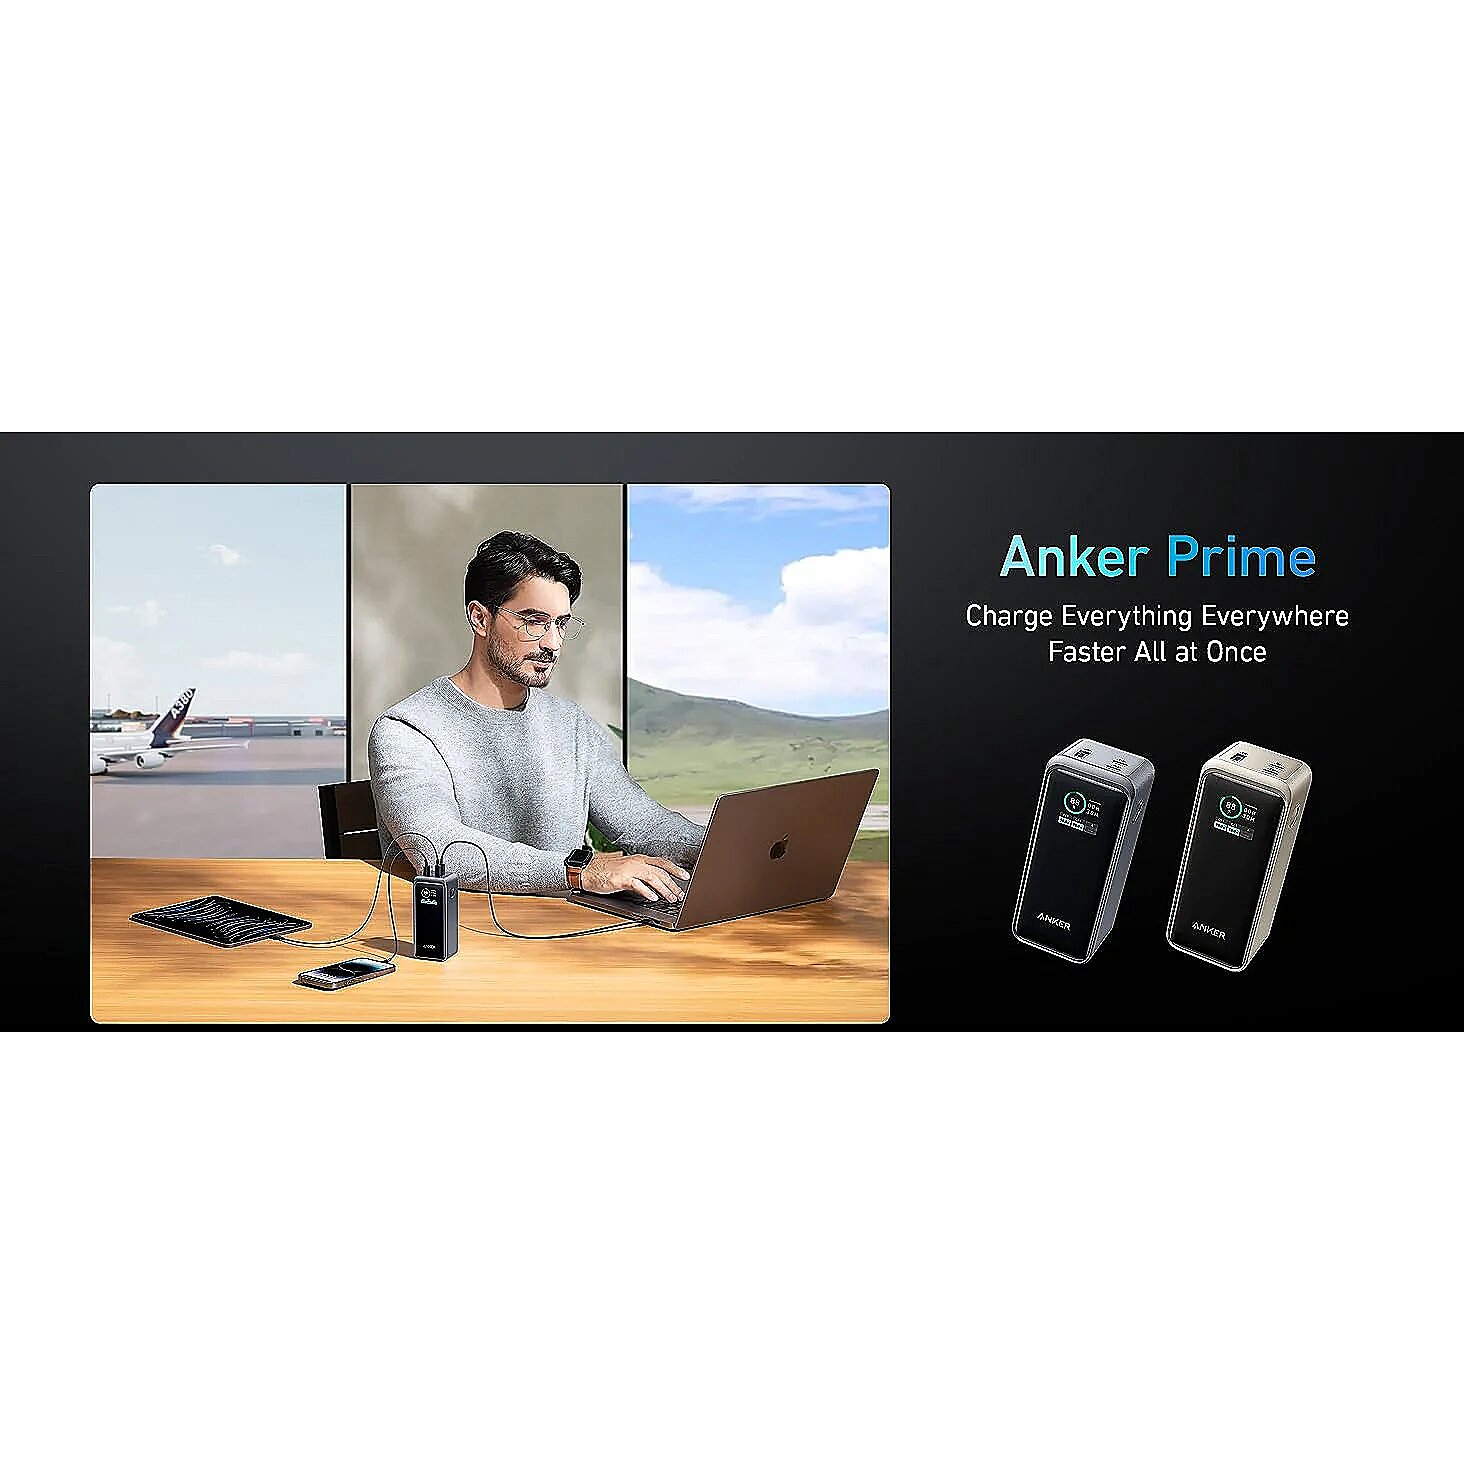 The Anker Prime Collection lets you charge everything, anywhere, faster